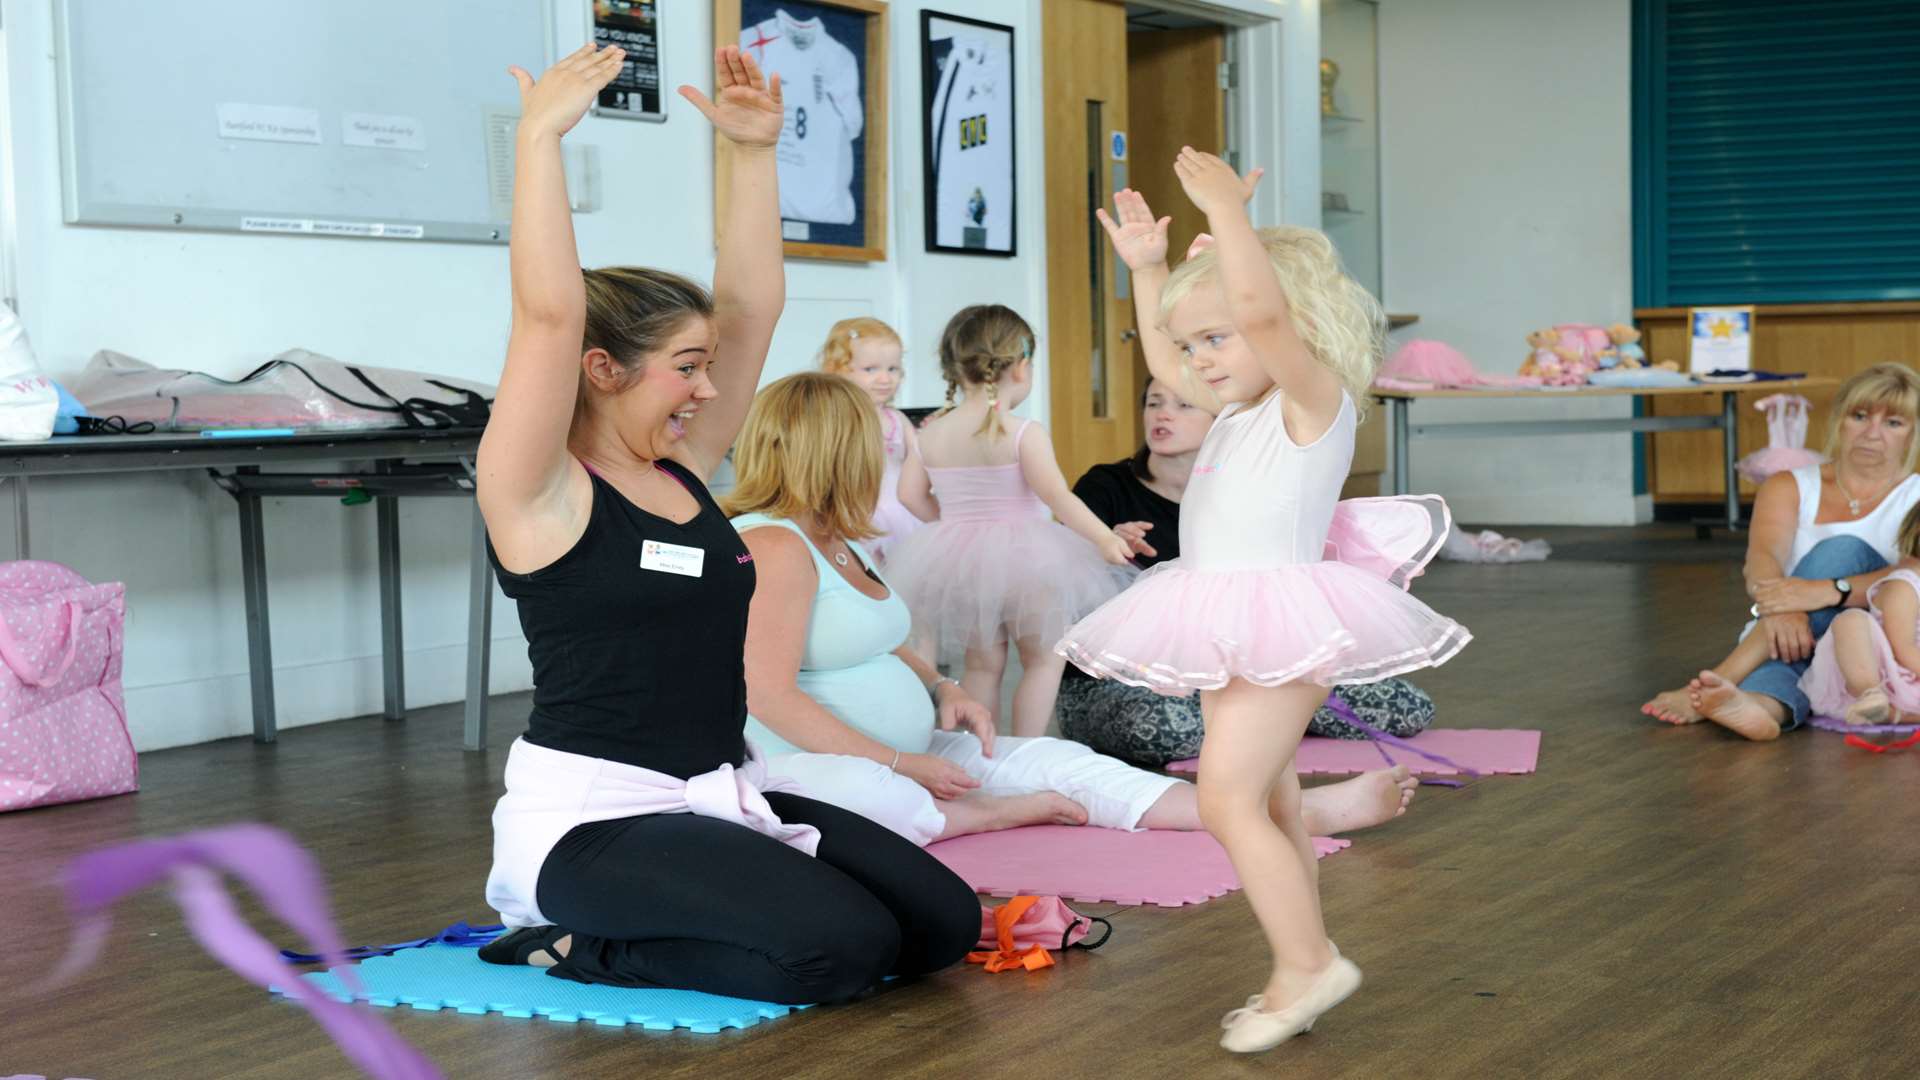 Baby ballet teacher Emily Waddell has won an award for most outstanding activity leader